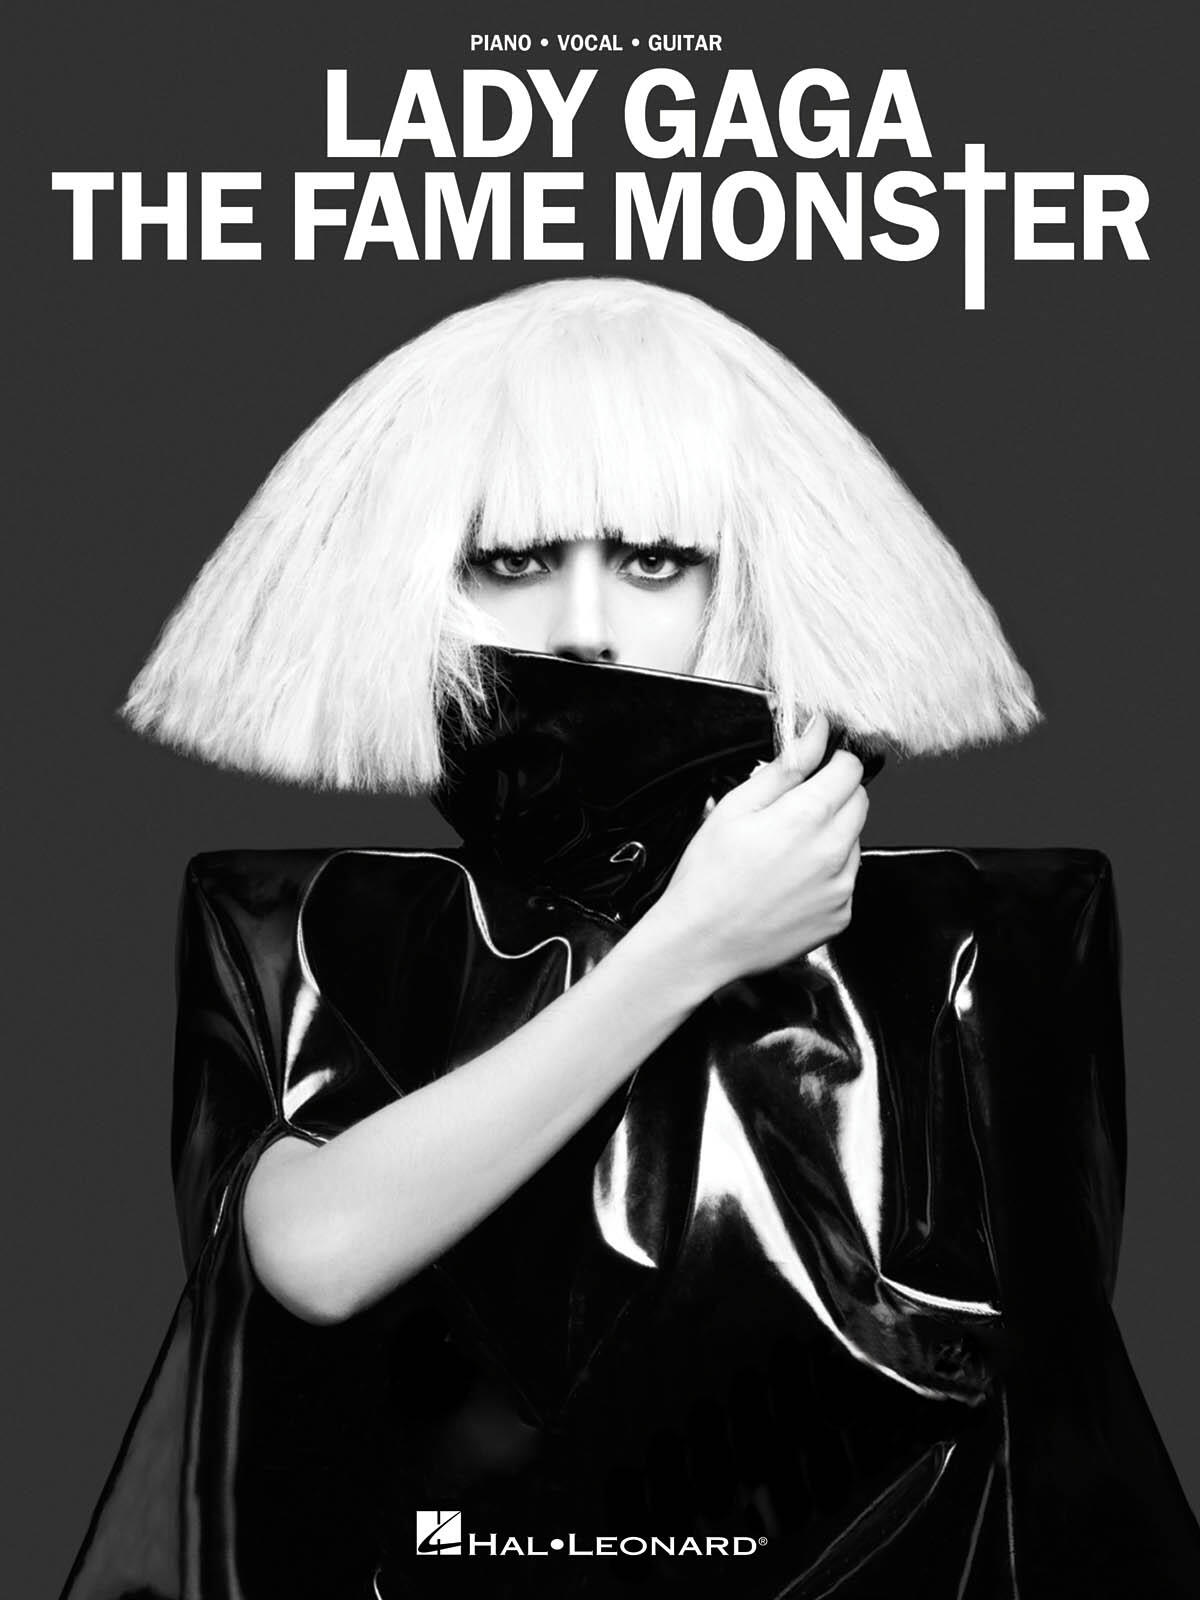 Lady Gaga - The Fame Monster : photo 1